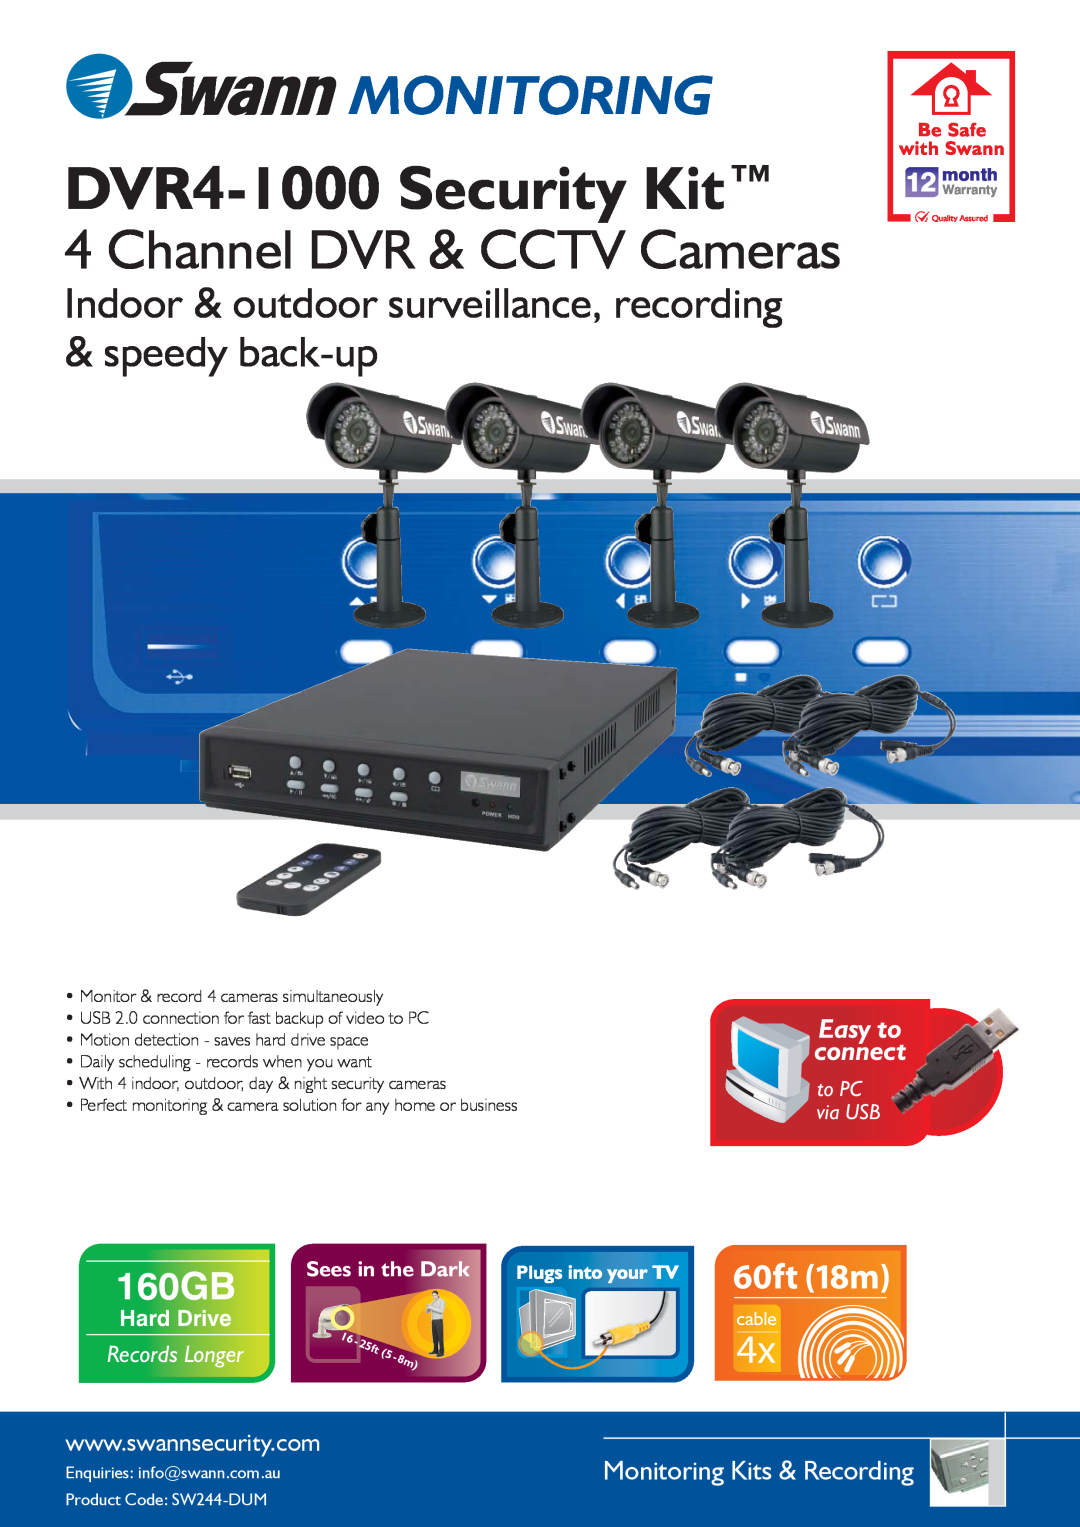 Swann warranty Monitoring, DVR4-1000 Security Kit, Channel DVR & CCTV Cameras, 160GB, 60ft 18m, Easy to connect, cable 